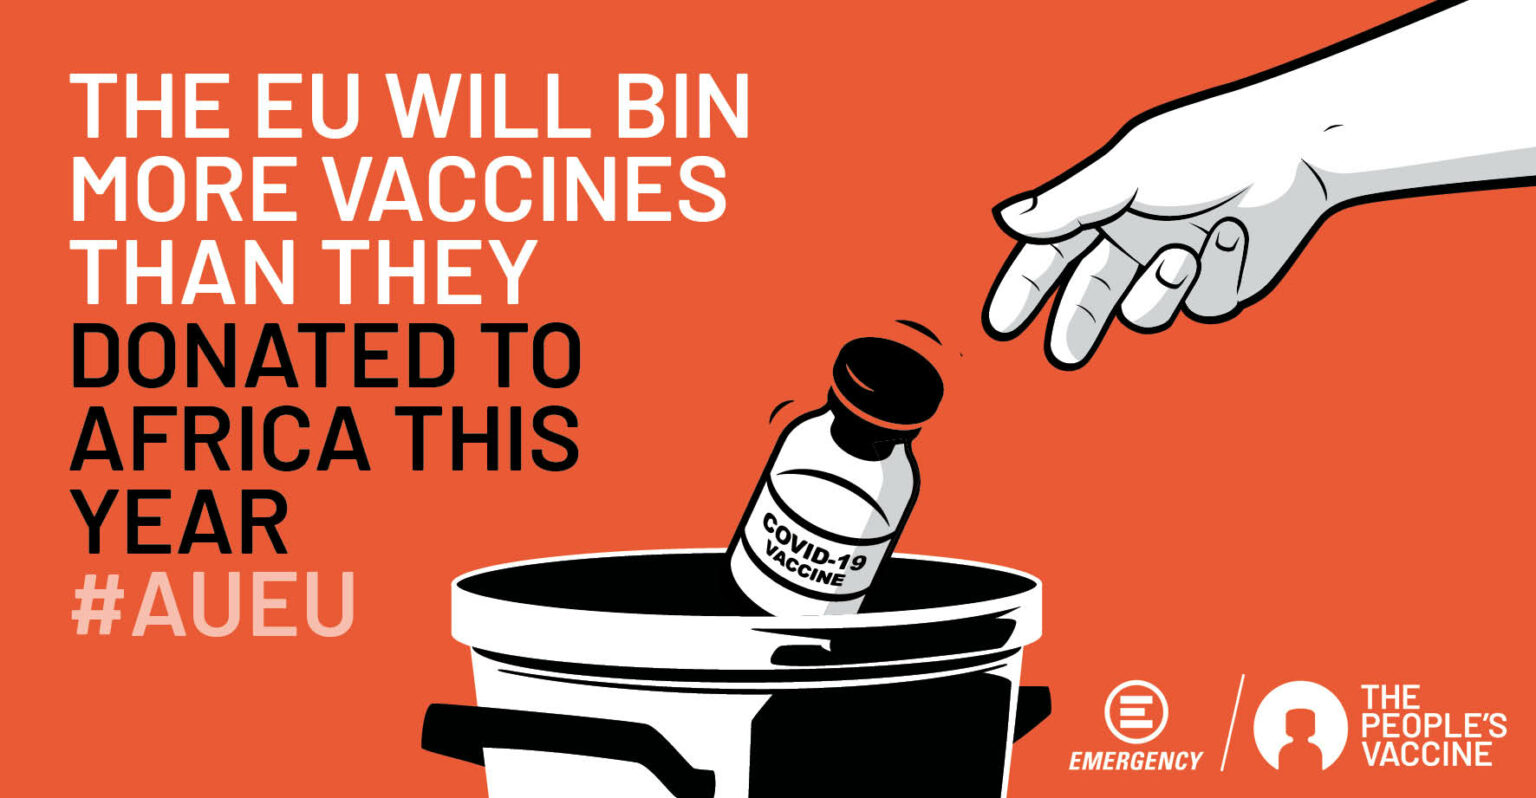 EU will bin more vaccines than donated to Africa